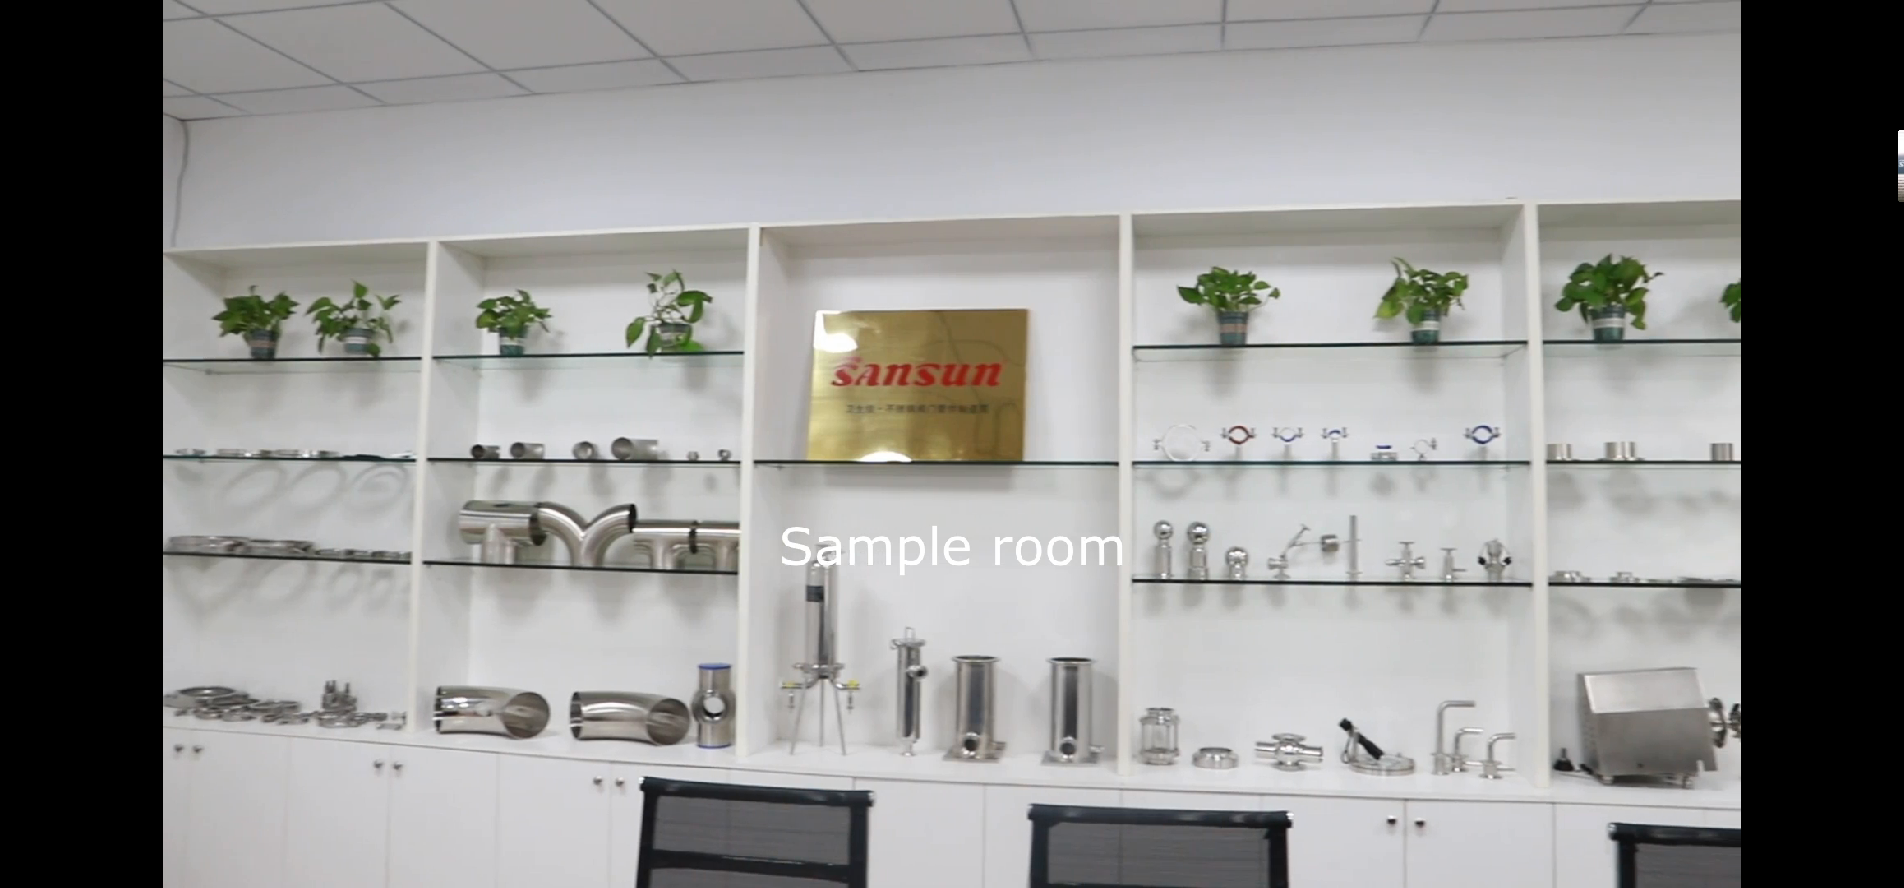 Come explore the sample room with me! valve，pipe fittings，pump，brew fittings